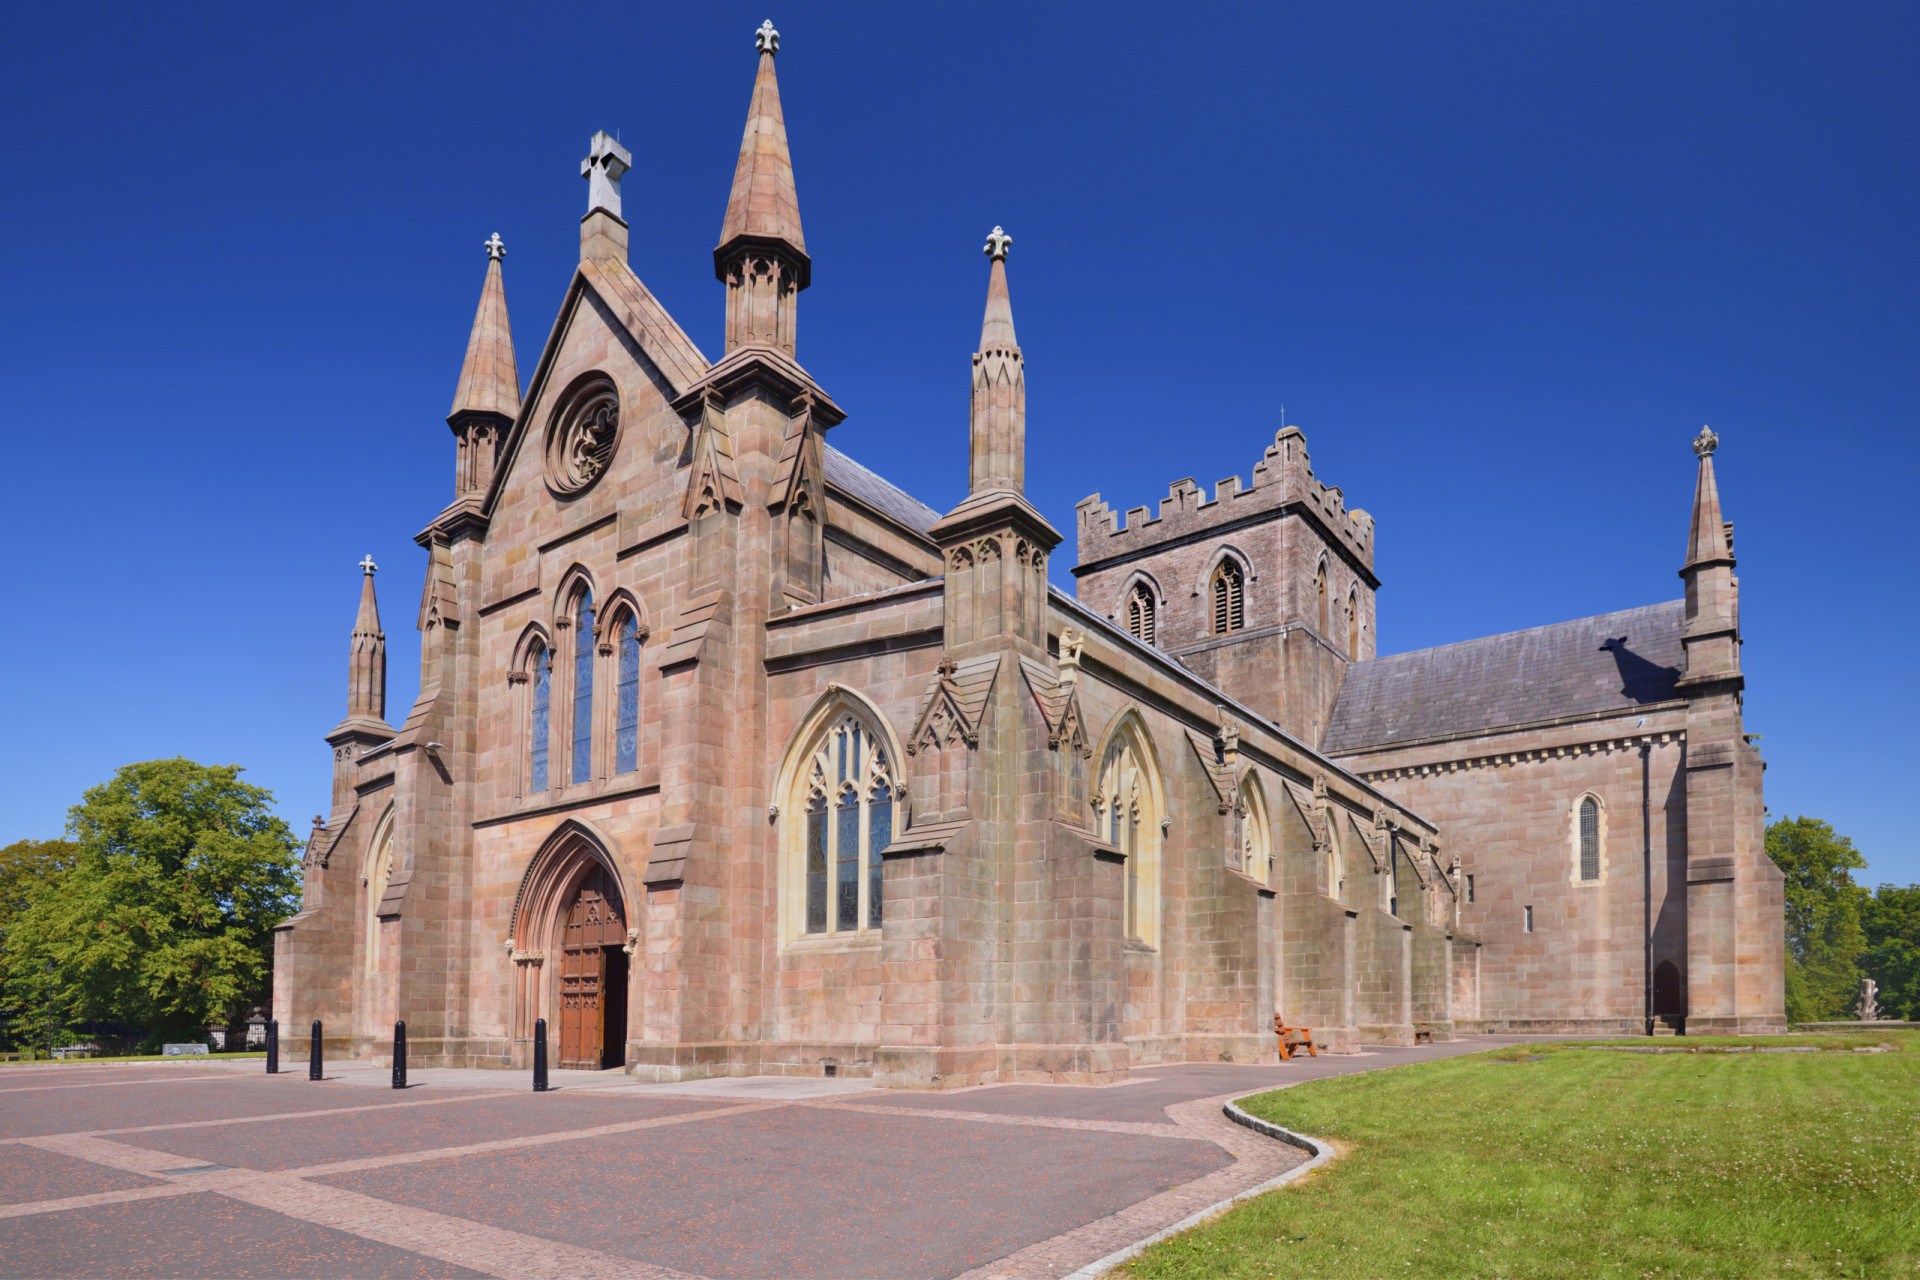 <p>Also known as the Saint Patrick route, it was here that the saint established his church. This made the town the ecclesiastical capital of the island.</p><p><a href="https://www.msn.com/en-us/community/channel/vid-7xx8mnucu55yw63we9va2gwr7uihbxwc68fxqp25x6tg4ftibpra?cvid=94631541bc0f4f89bfd59158d696ad7e">Follow us and access great exclusive content every day</a></p>